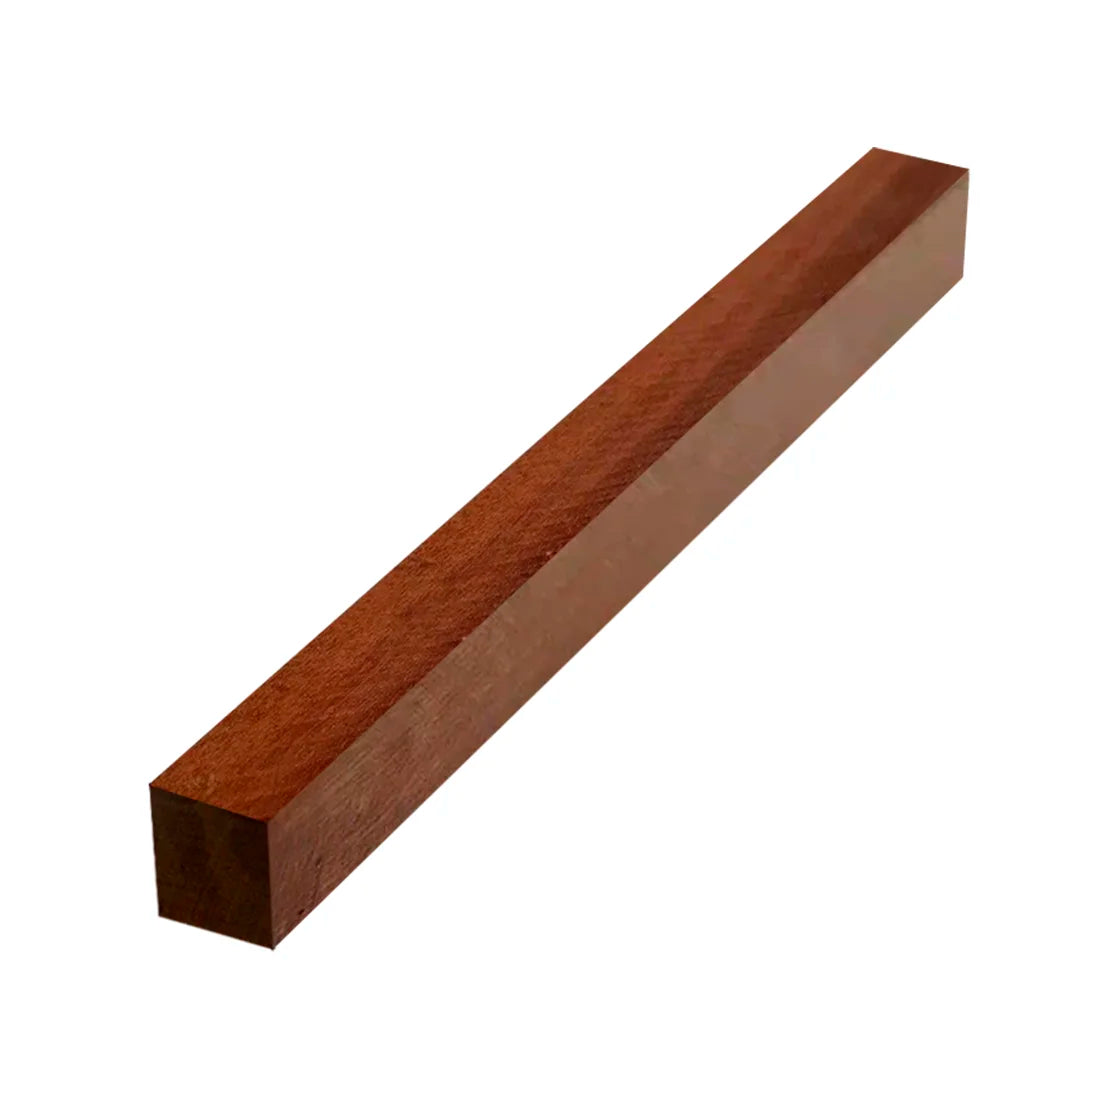 Bloodwood Hobby Wood/ Turning Wood Blanks 1 x 1 x 12 inches - Exotic Wood Zone - Buy online Across USA 